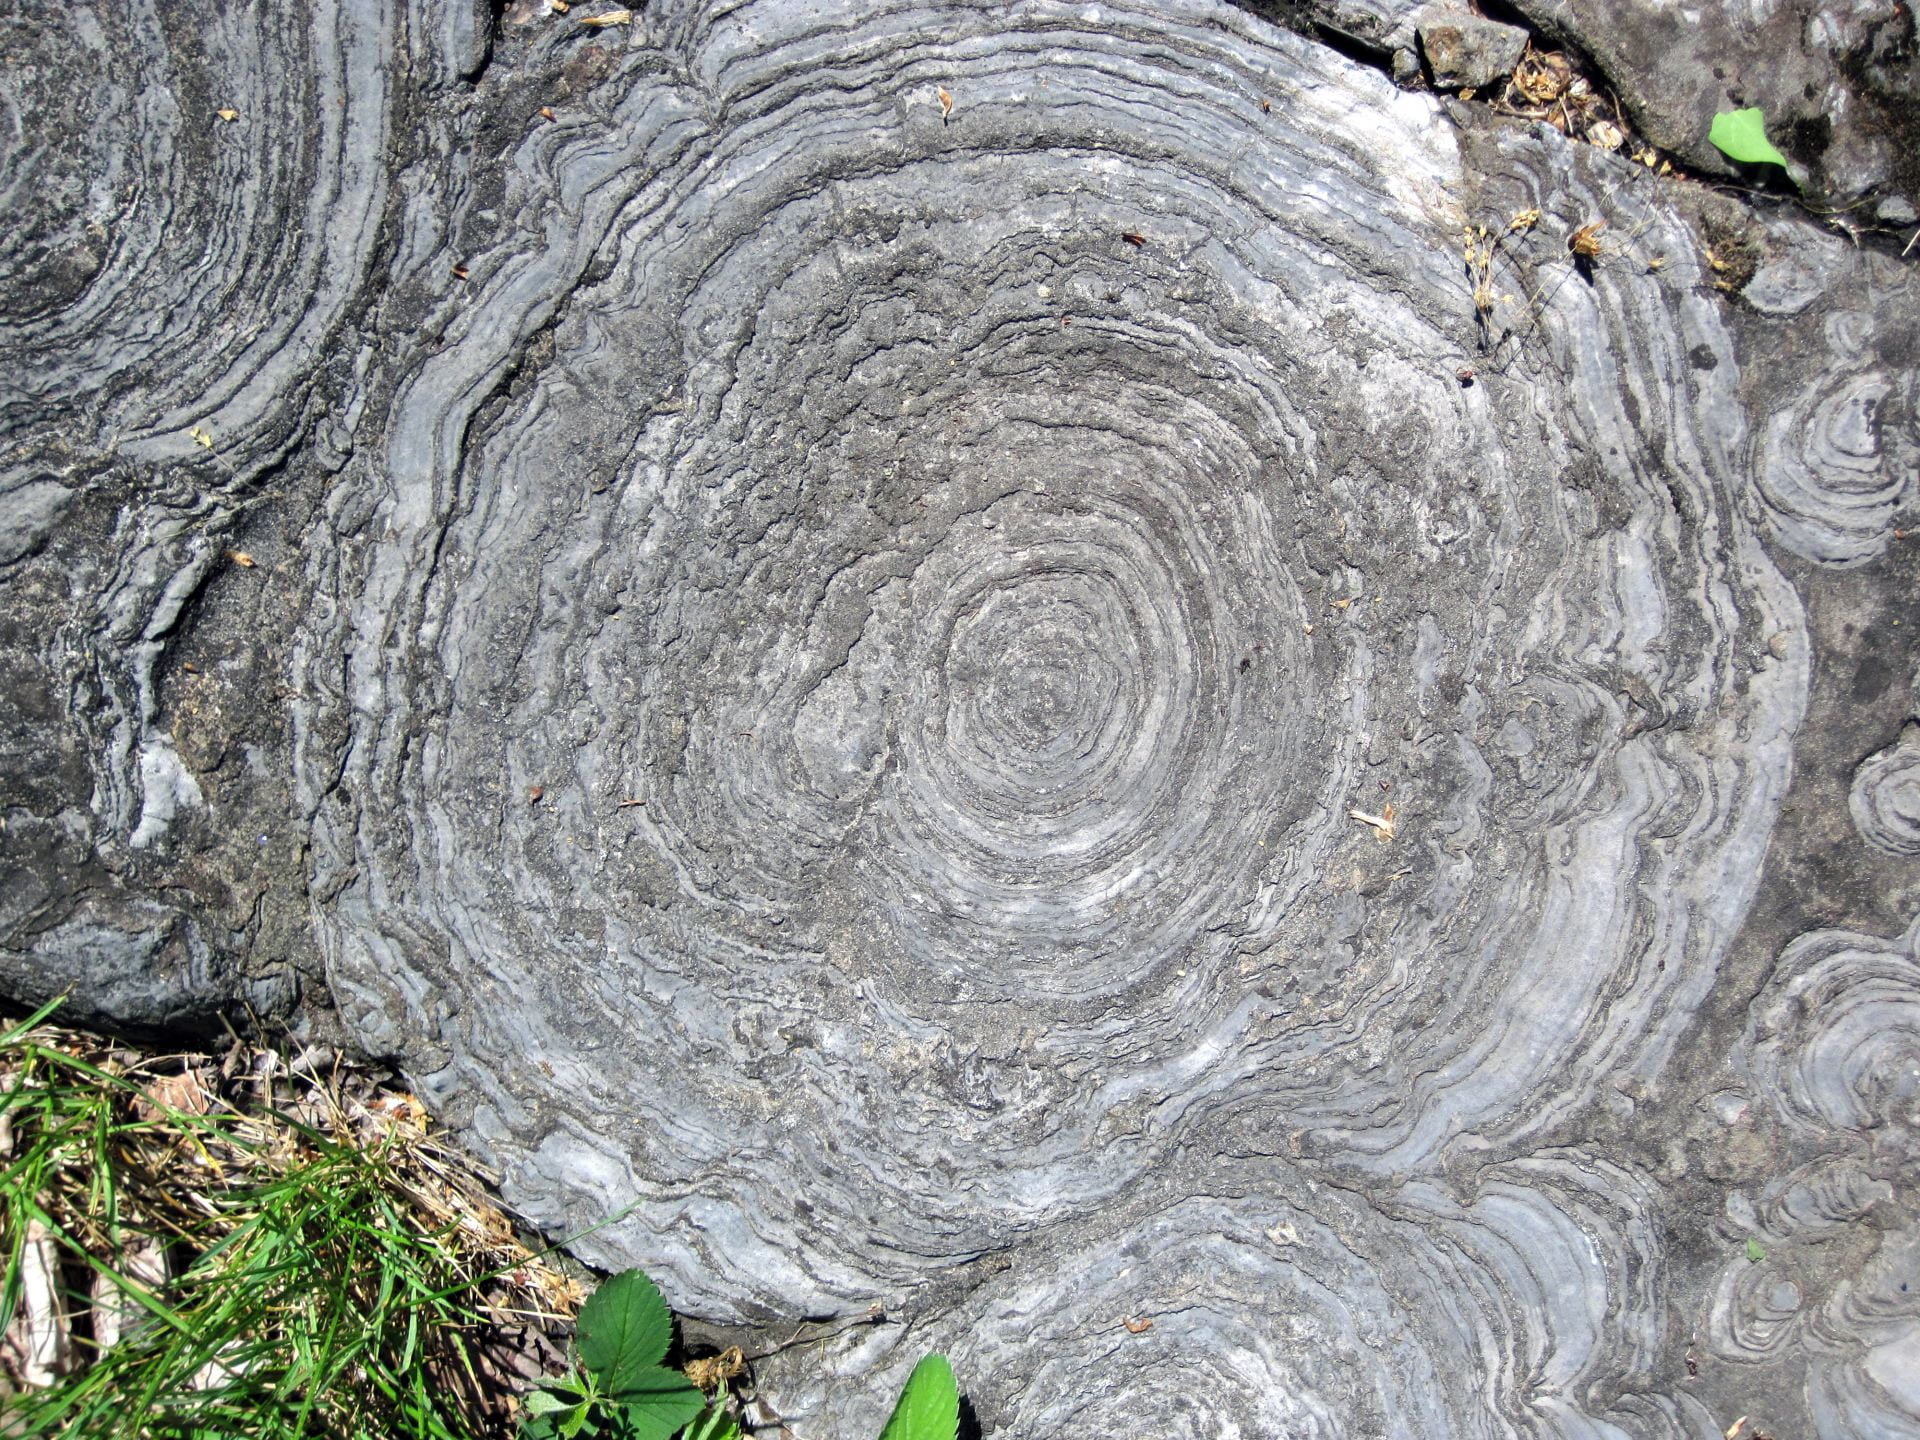 Cambrian stromatolites can be found in Saratoga Springs, NY.